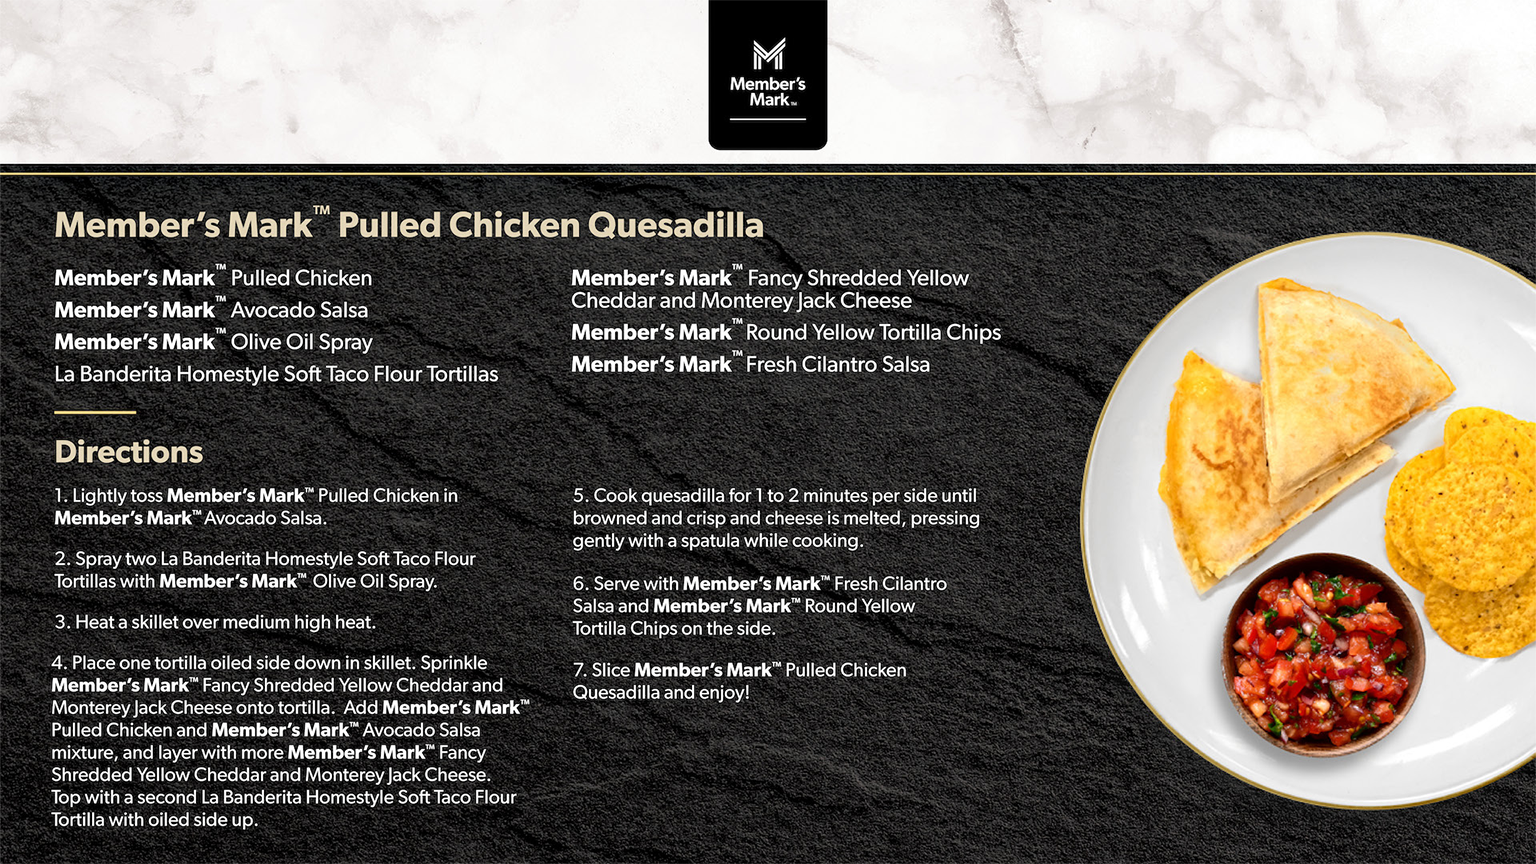 Ingredients and recipe for Member’s Mark Pulled Chicken Quesadilla.